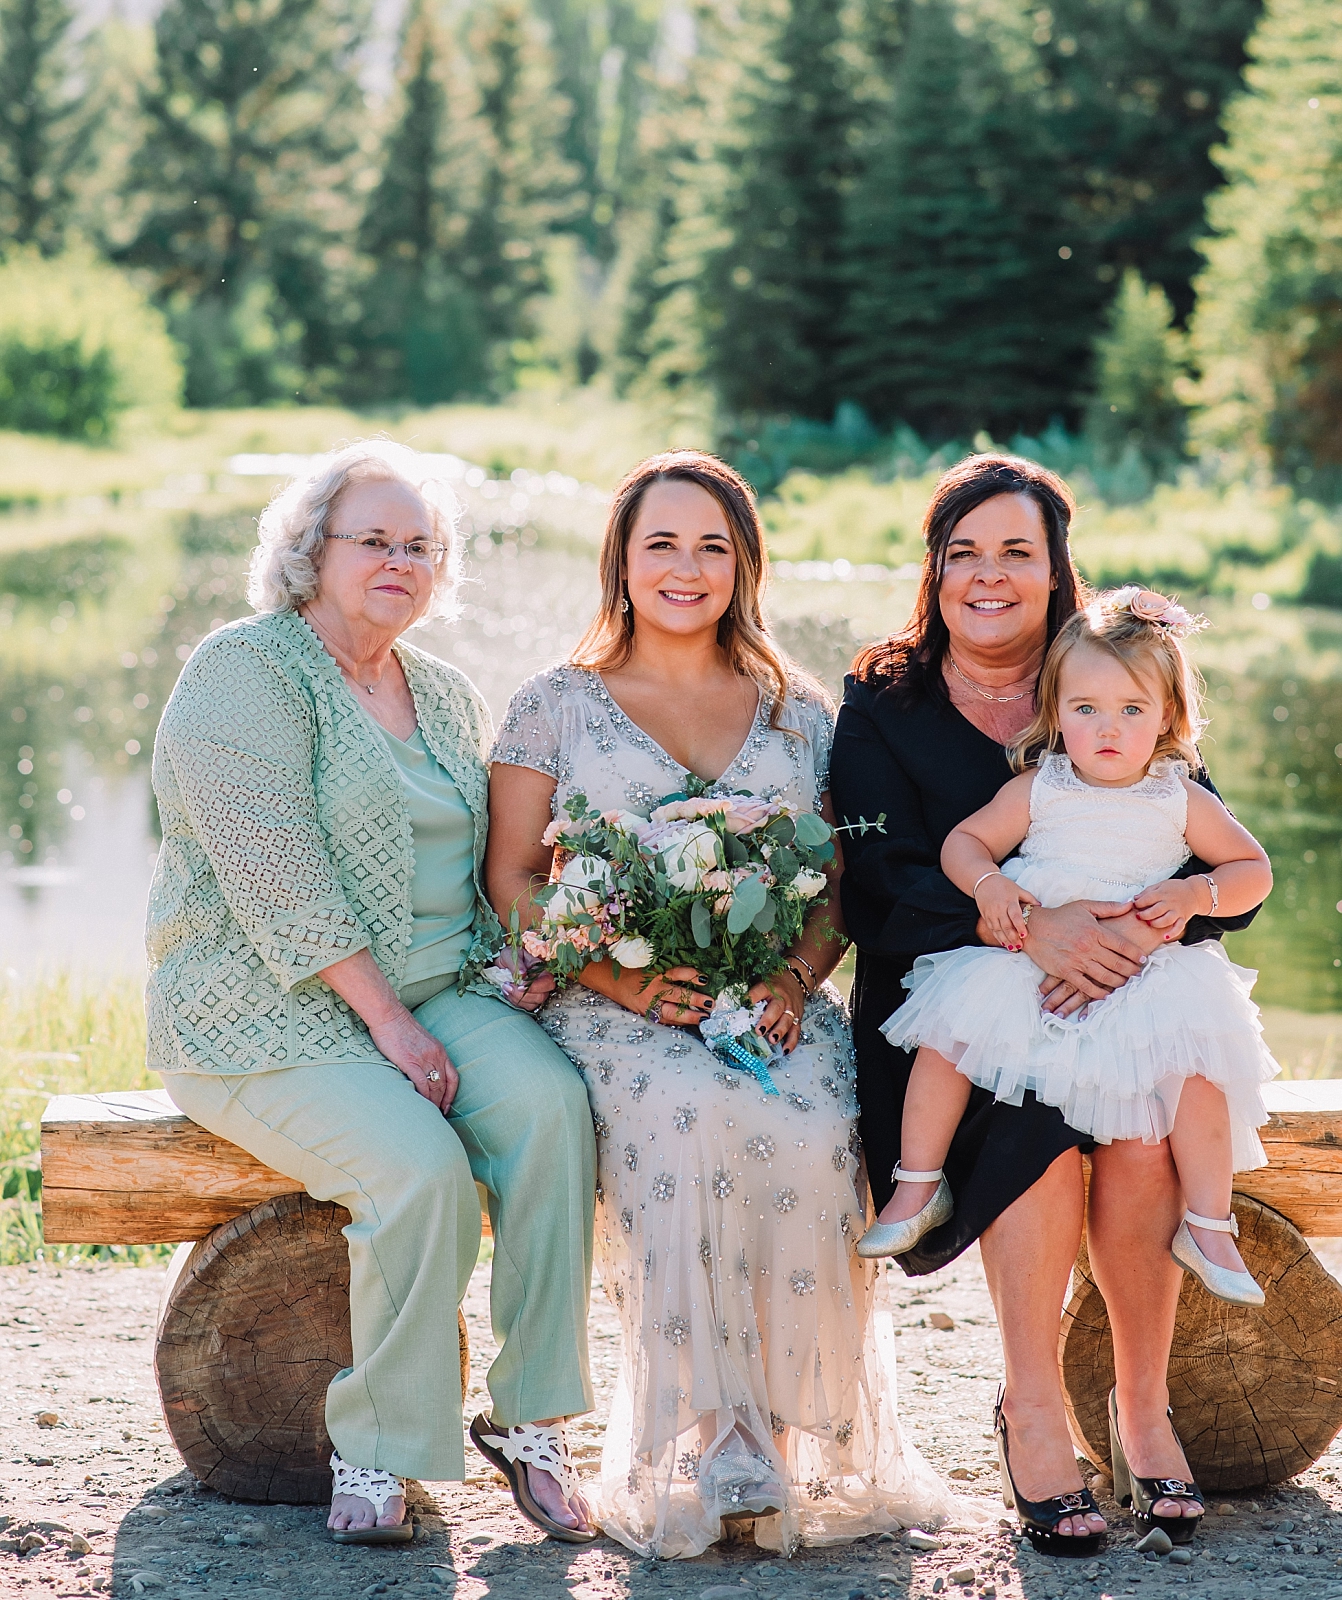 multi-generational photos on your wedding day